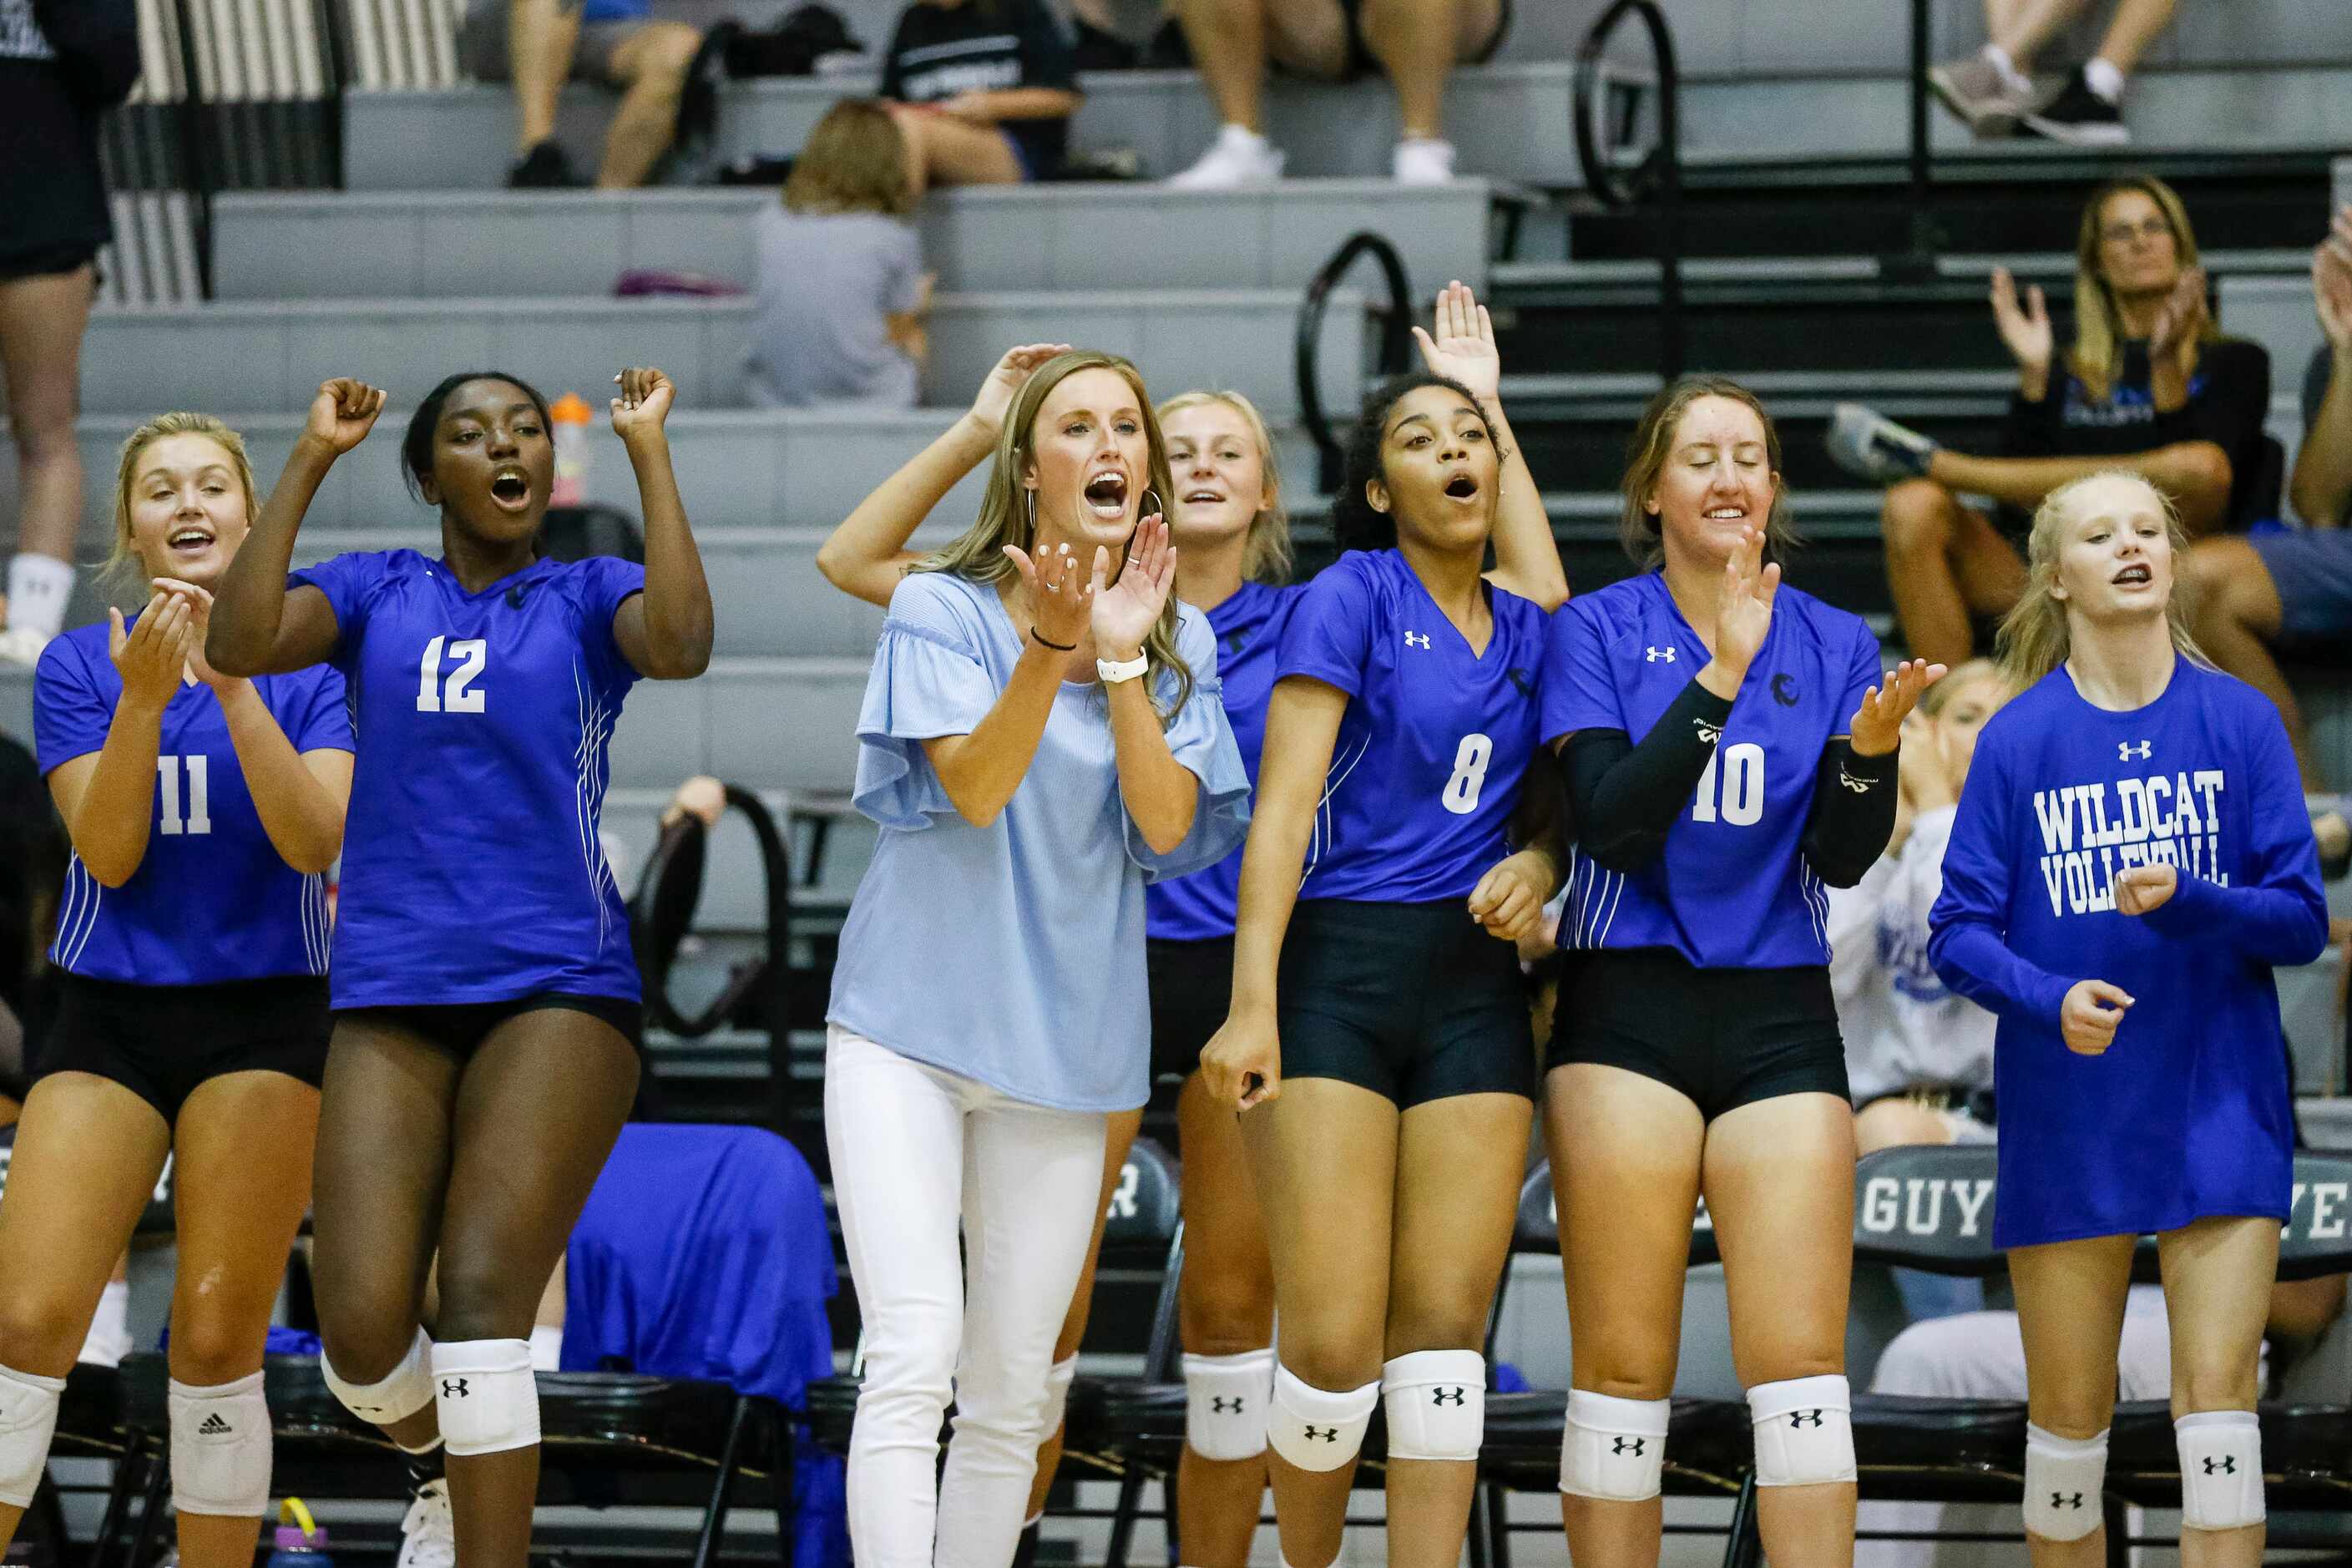 Denton Guyer head coach Leslie Jackson and the bench react after a point during the second...